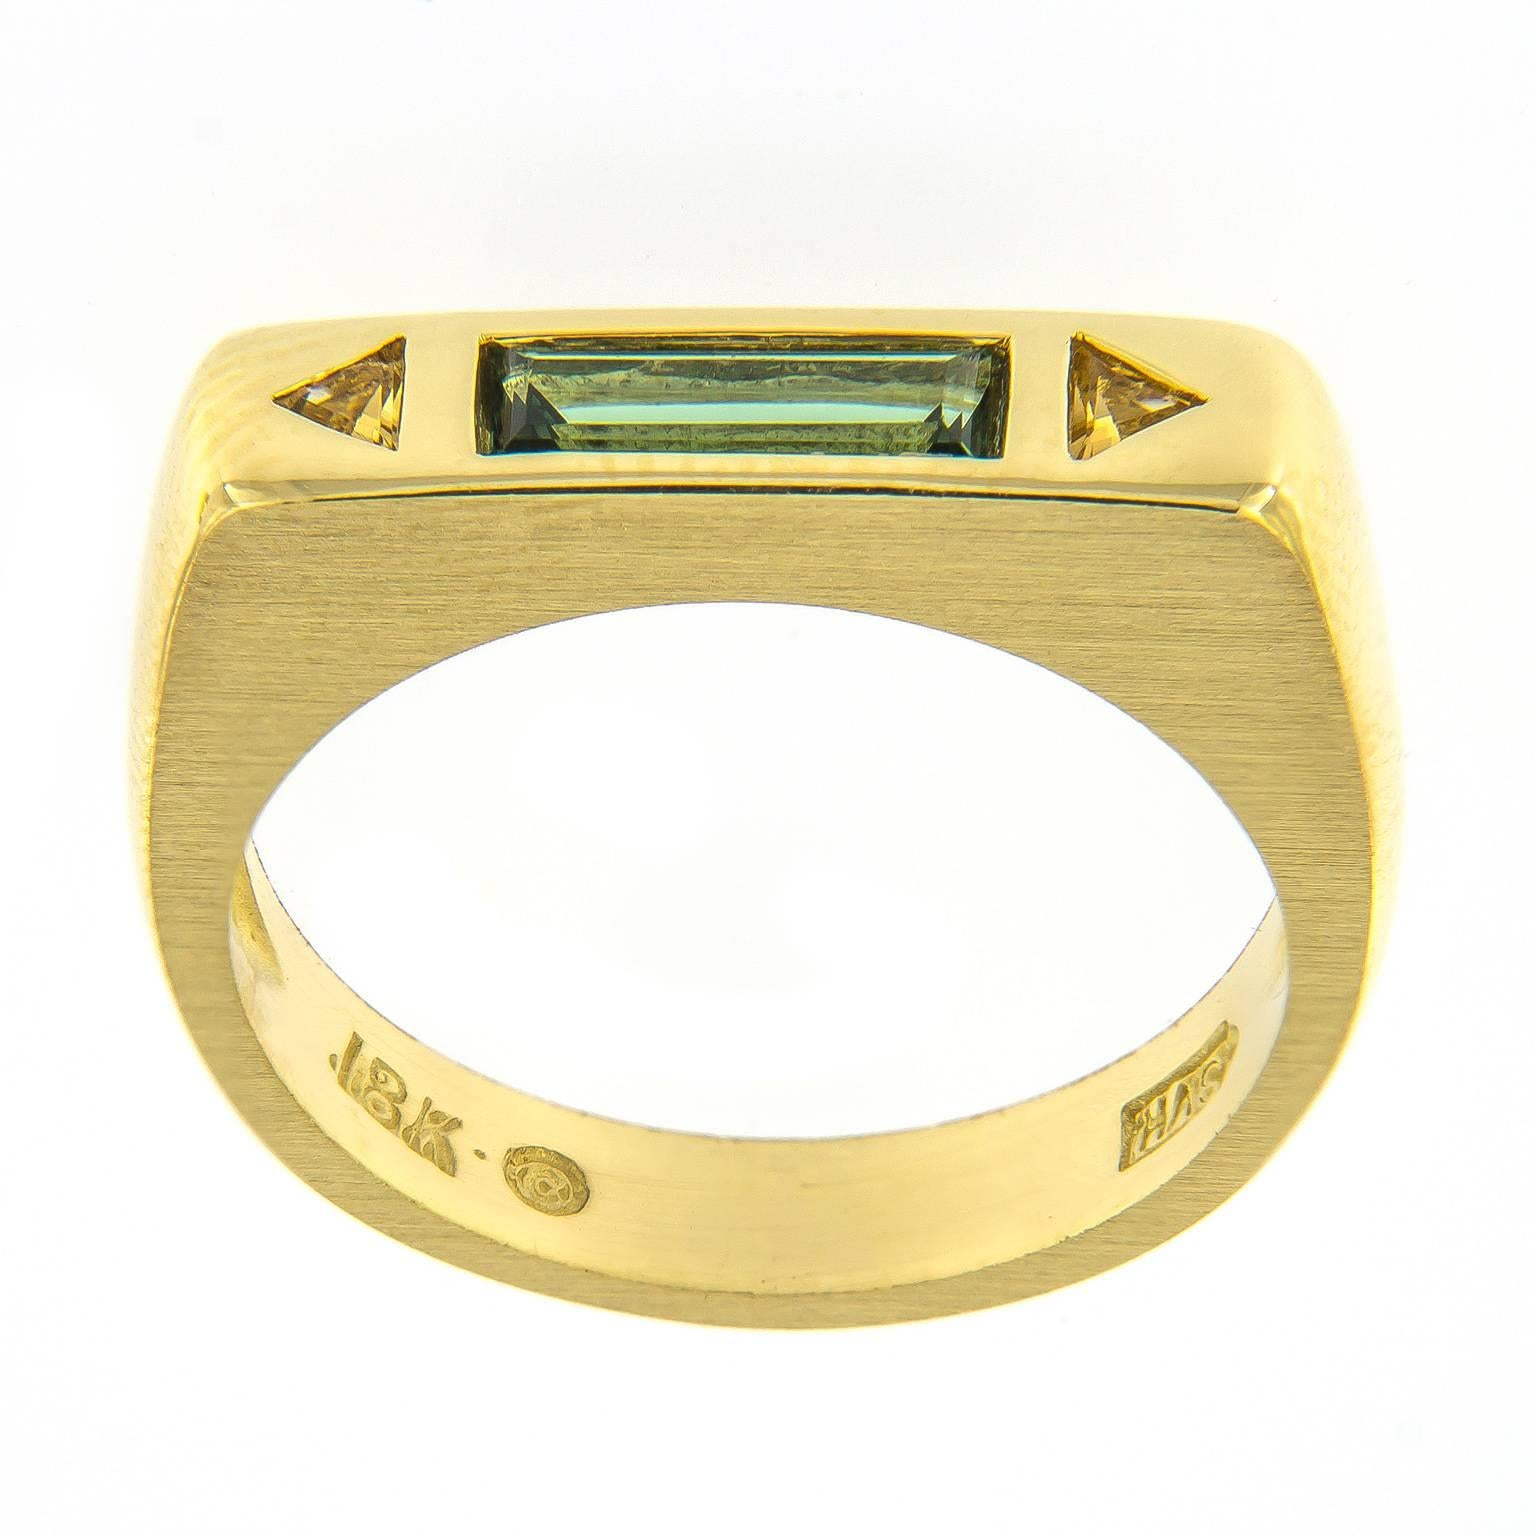 Vintage stacking textured bar ring with baguette green tourmaline accented with two triangle citrines, set in 18k yellow gold. Ring Size 5.5.